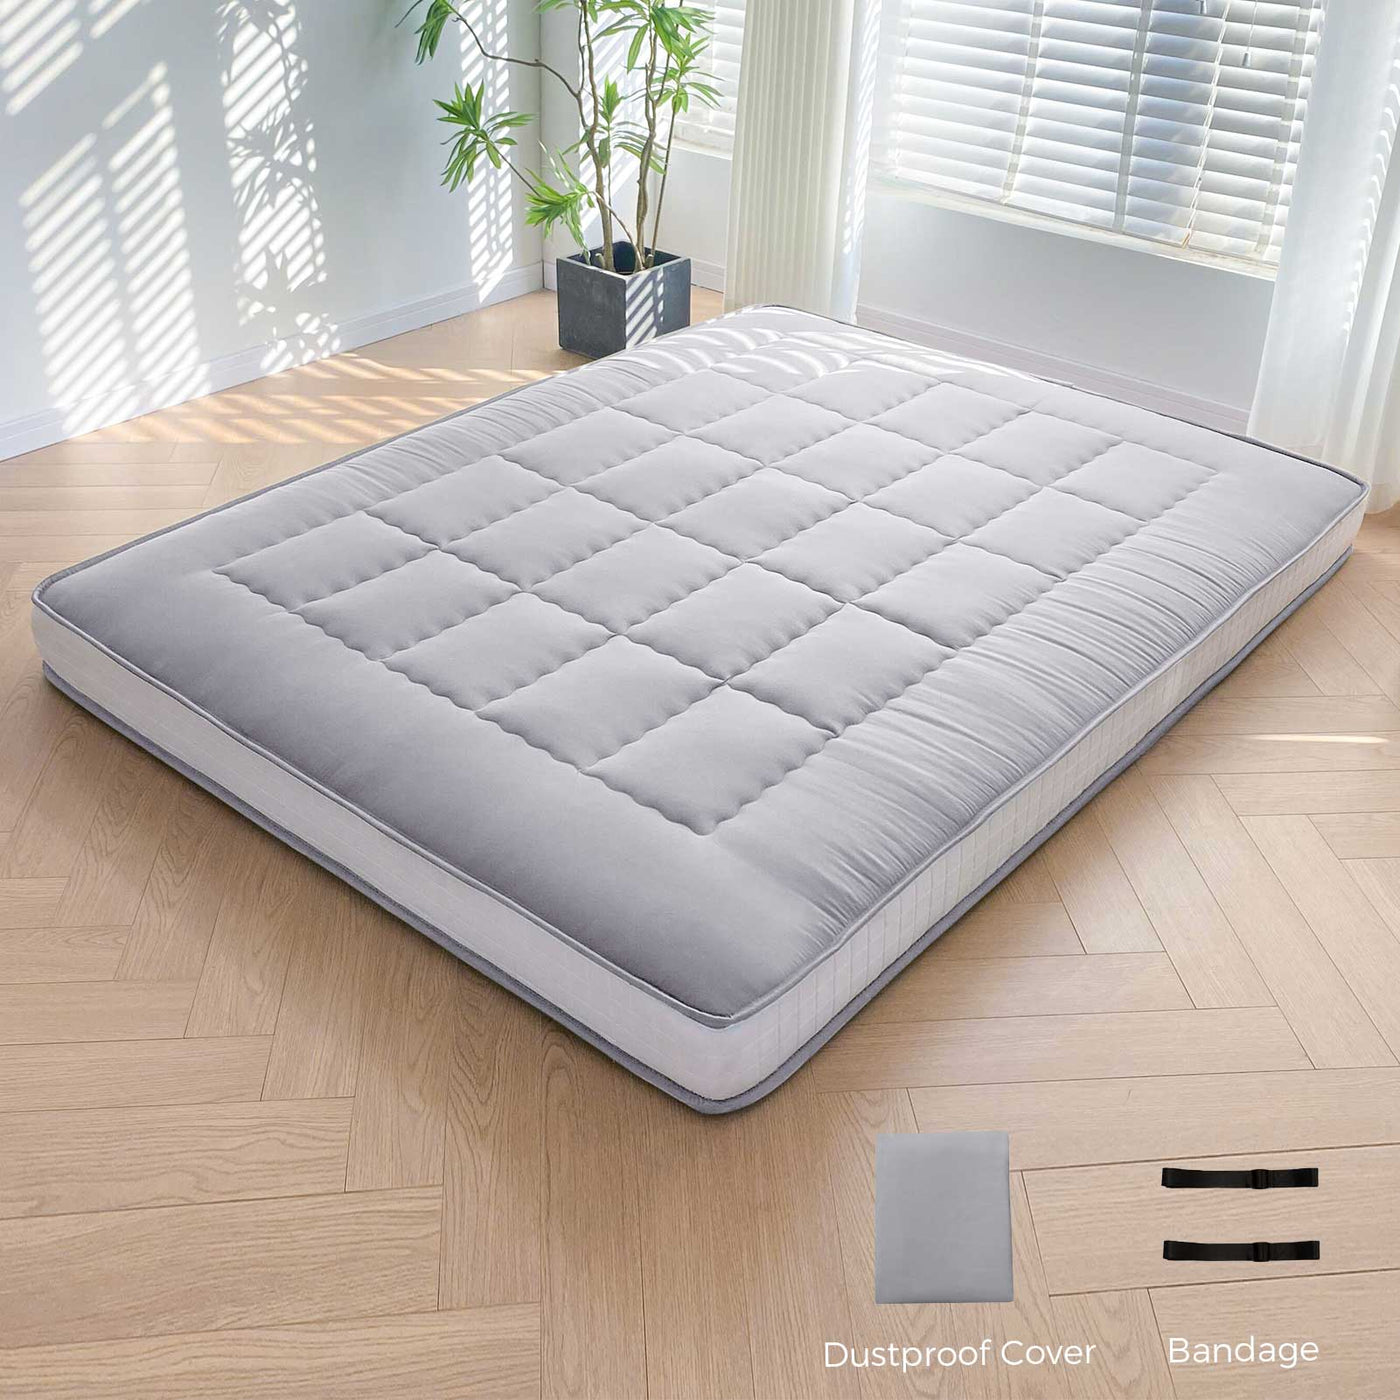 MAXYOYO 6" Extra Thick Japanese Futon Mattress with Rectangle Quilted, Stylish Floor Bed For Family, Grey